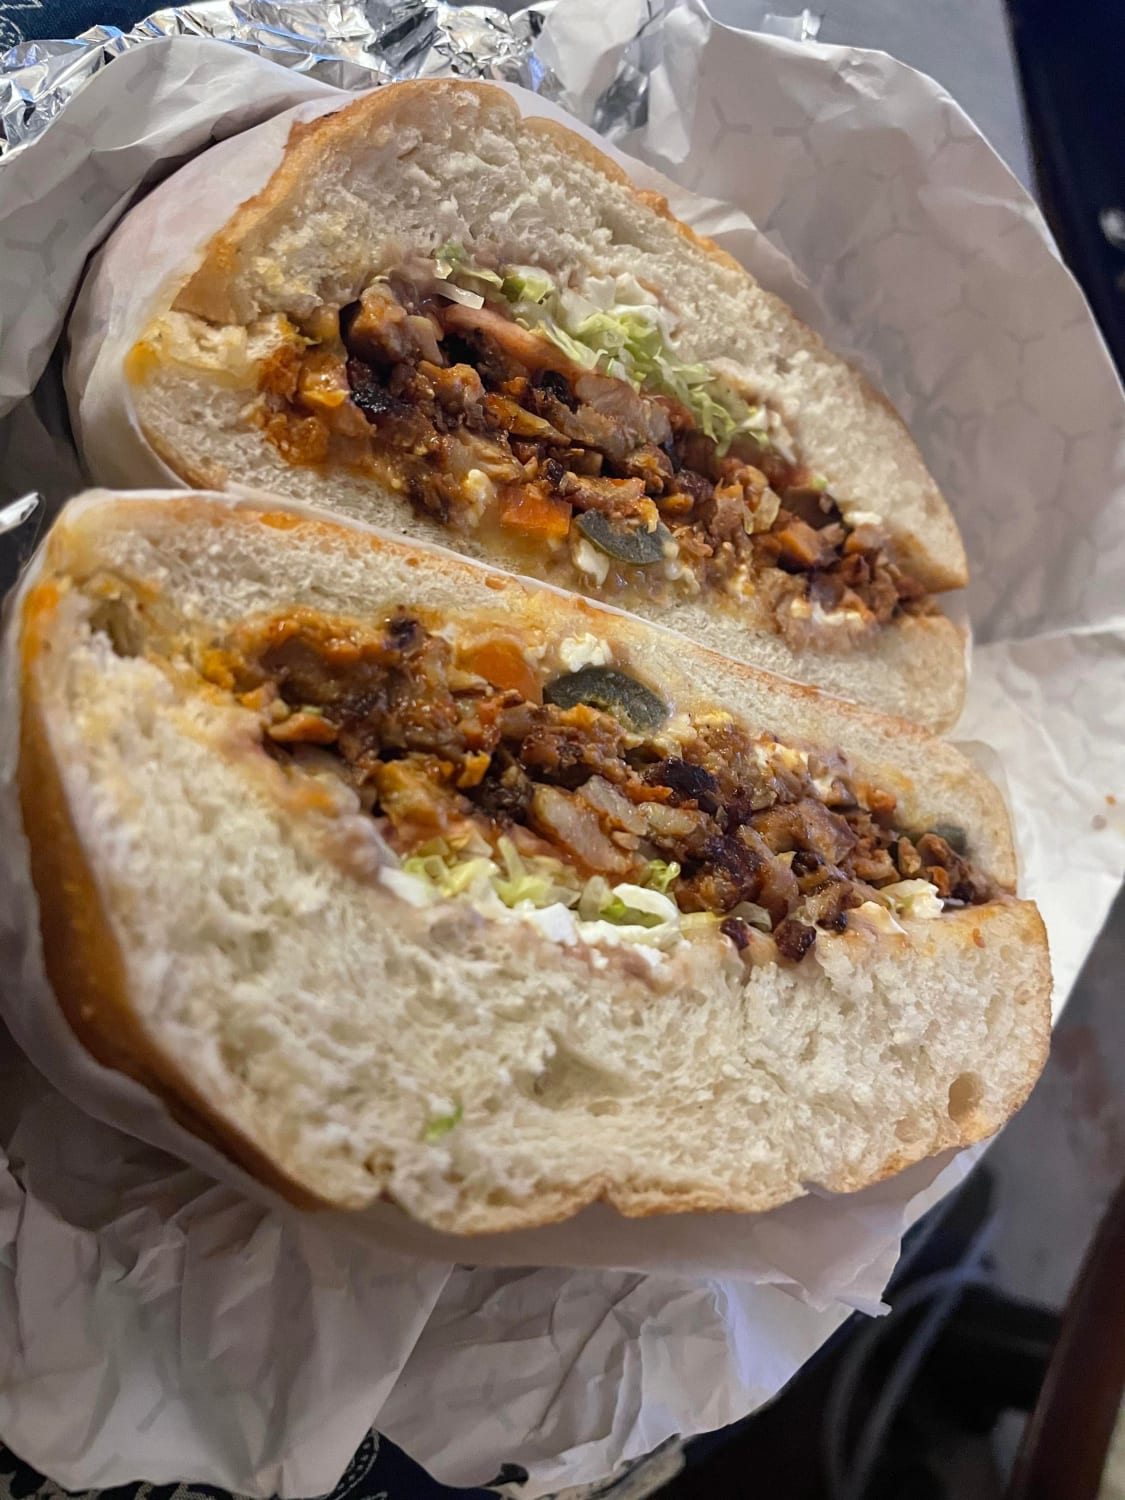 Al Pastor Torta from Jalapeno King in Brooklyn, as recommended by this sub!